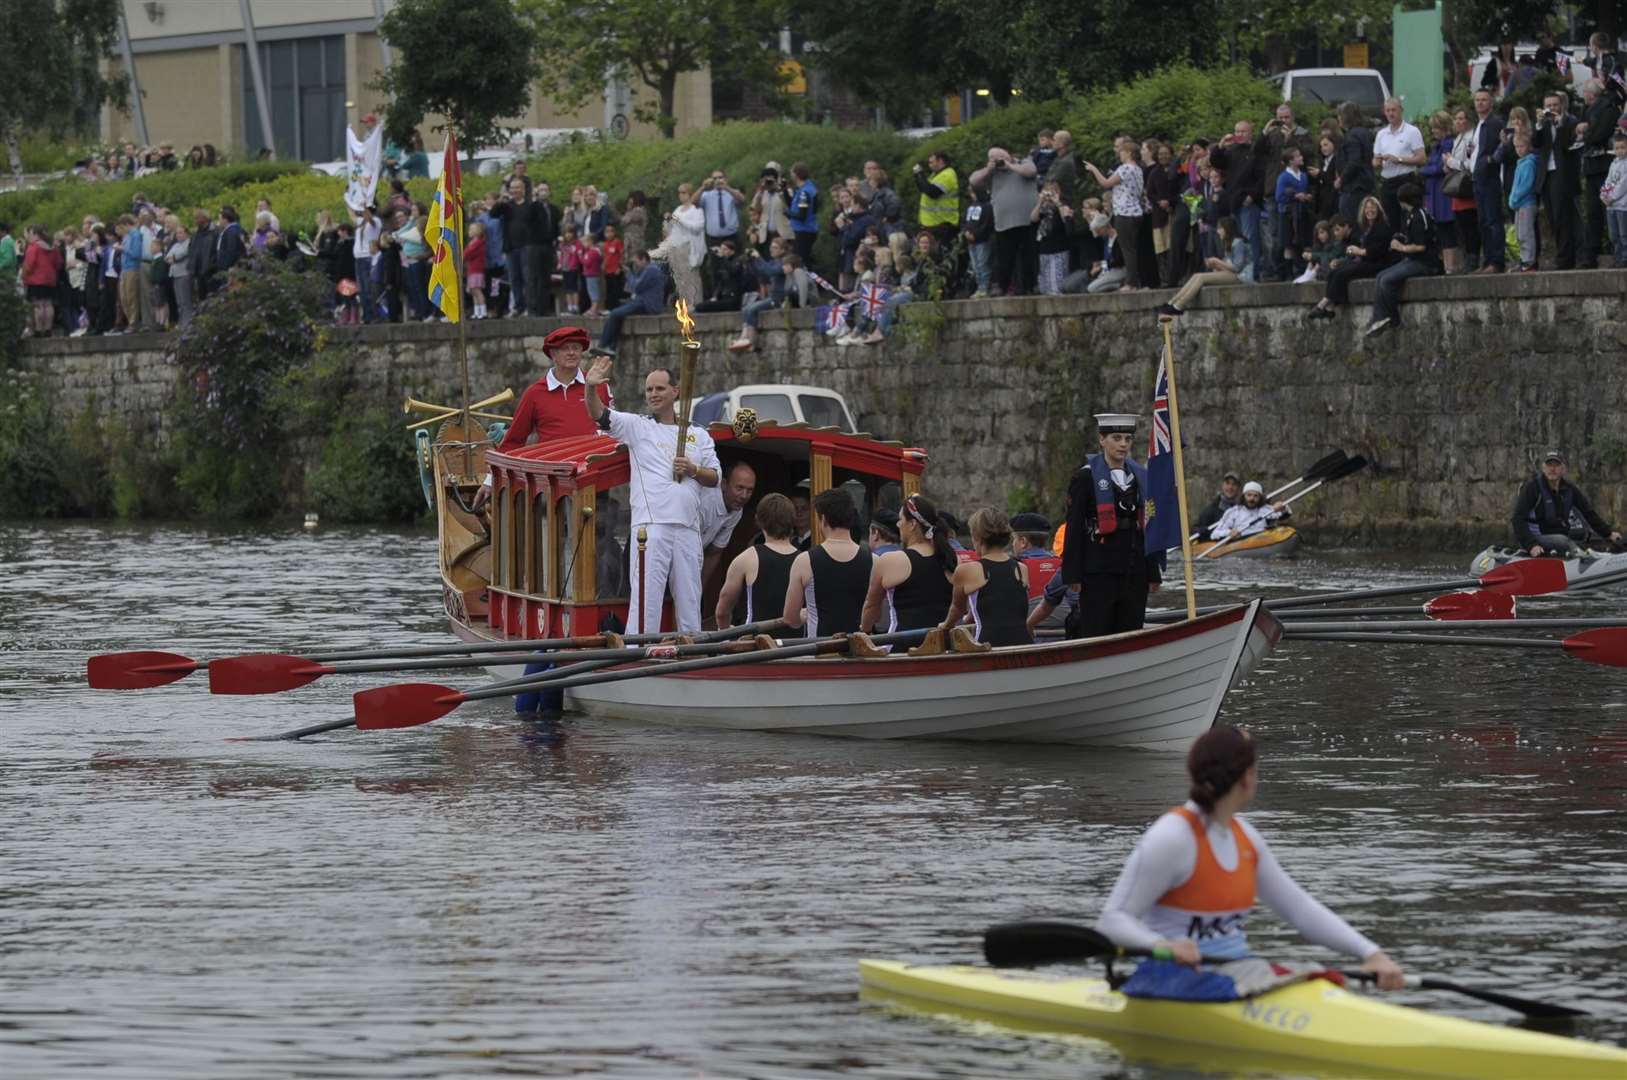 David Boyle from Tonbridge with the torch on the River Medway at Maidstone